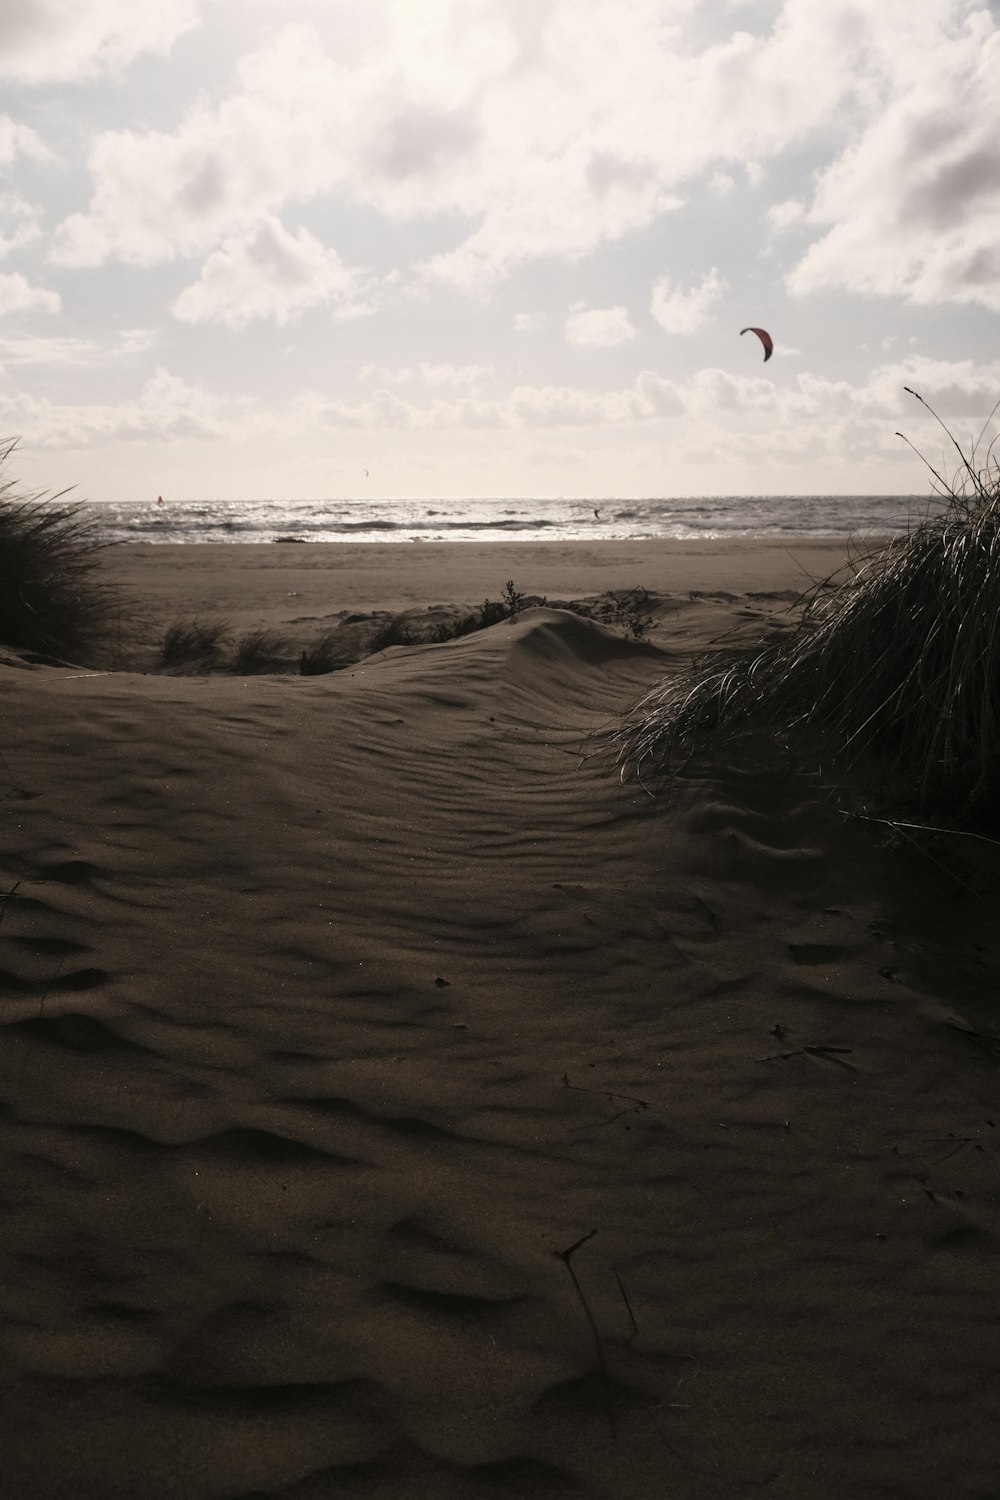 a person flying a kite on top of a sandy beach